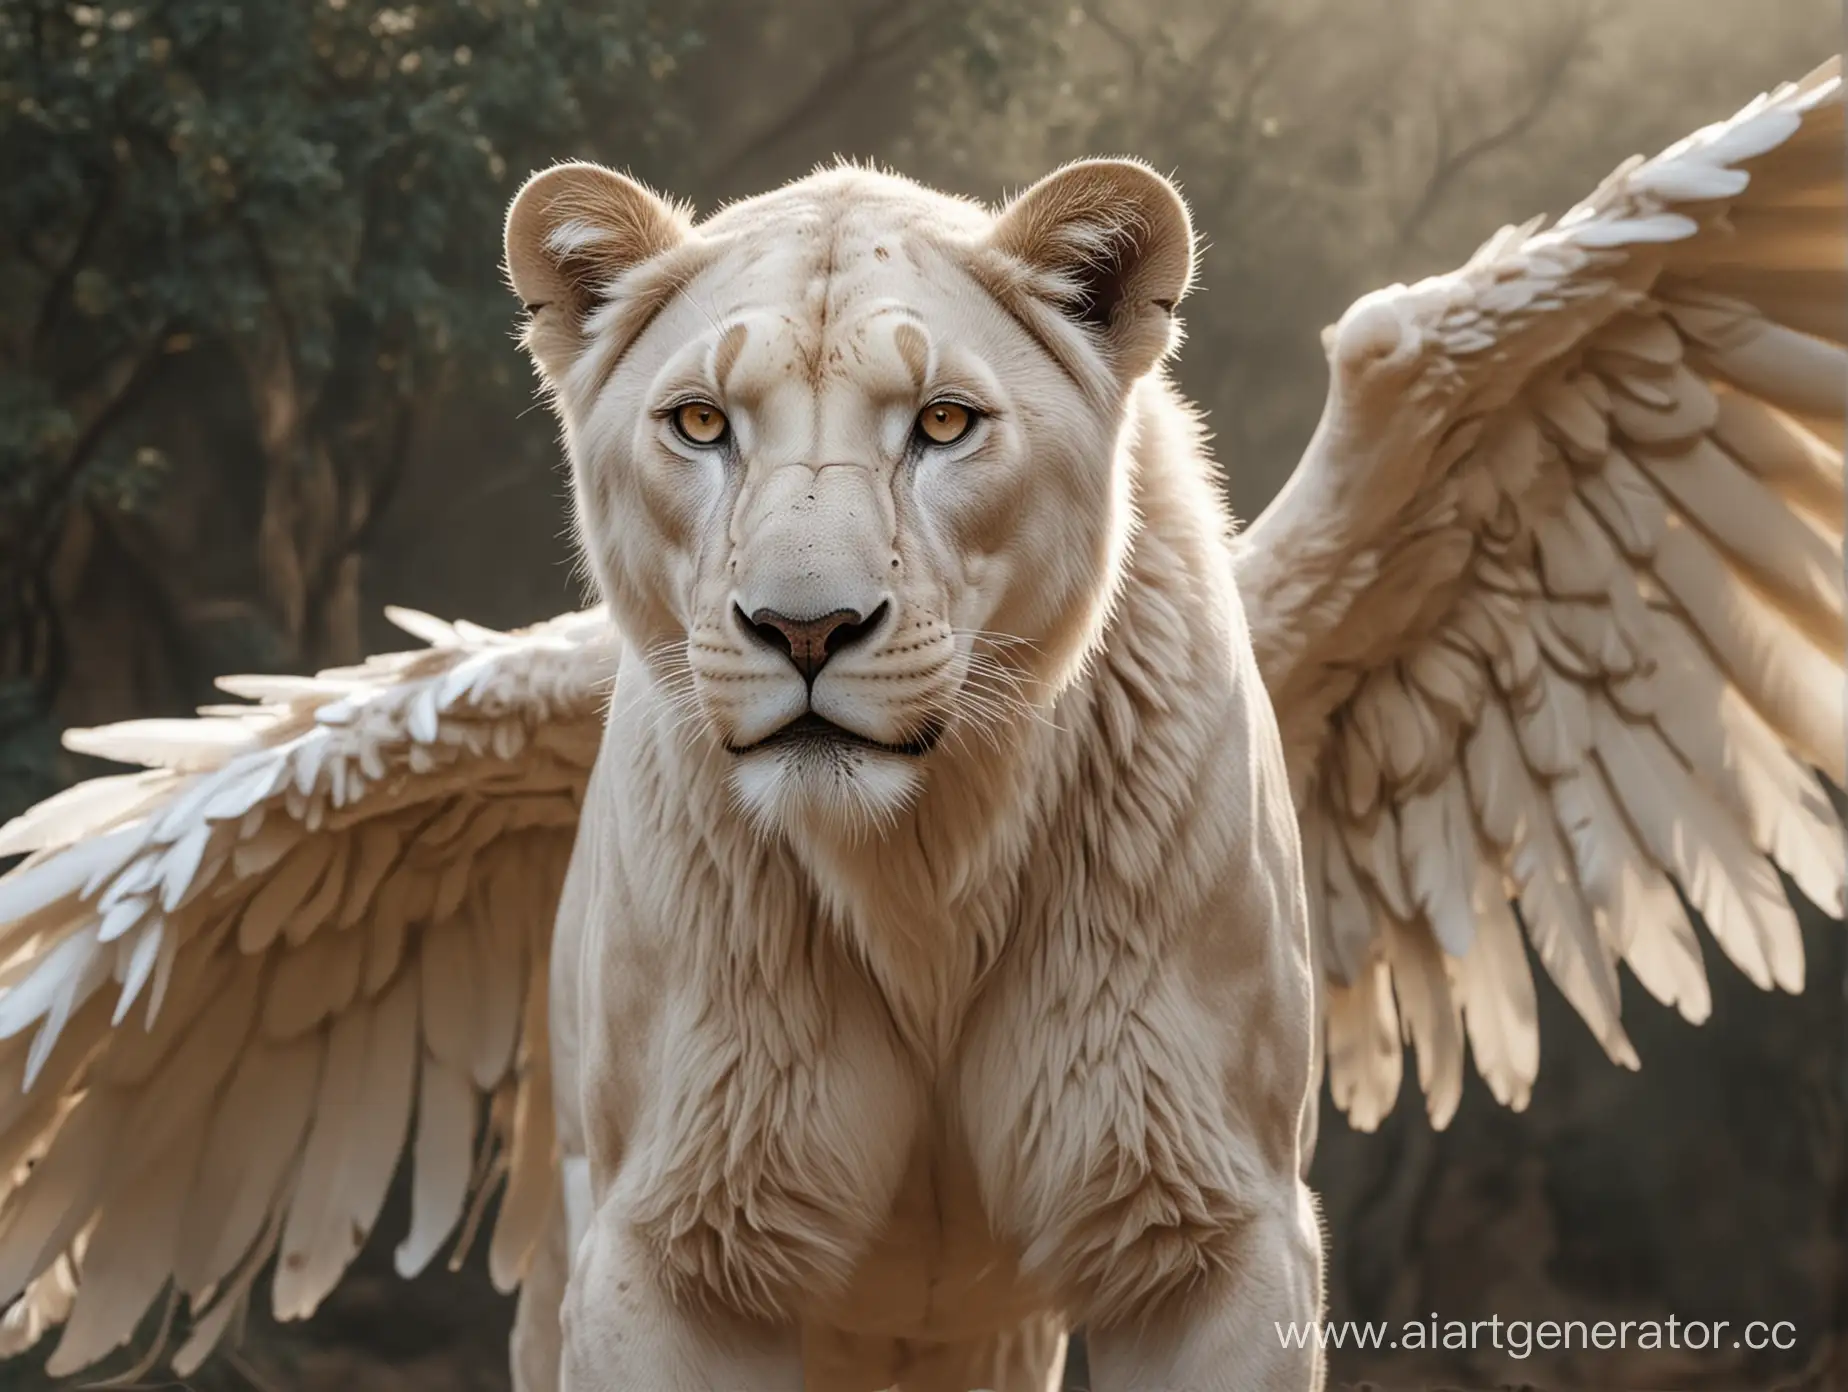 Majestic-White-Lioness-with-Feathered-Wings-in-Dynamic-Full-Height-Pose